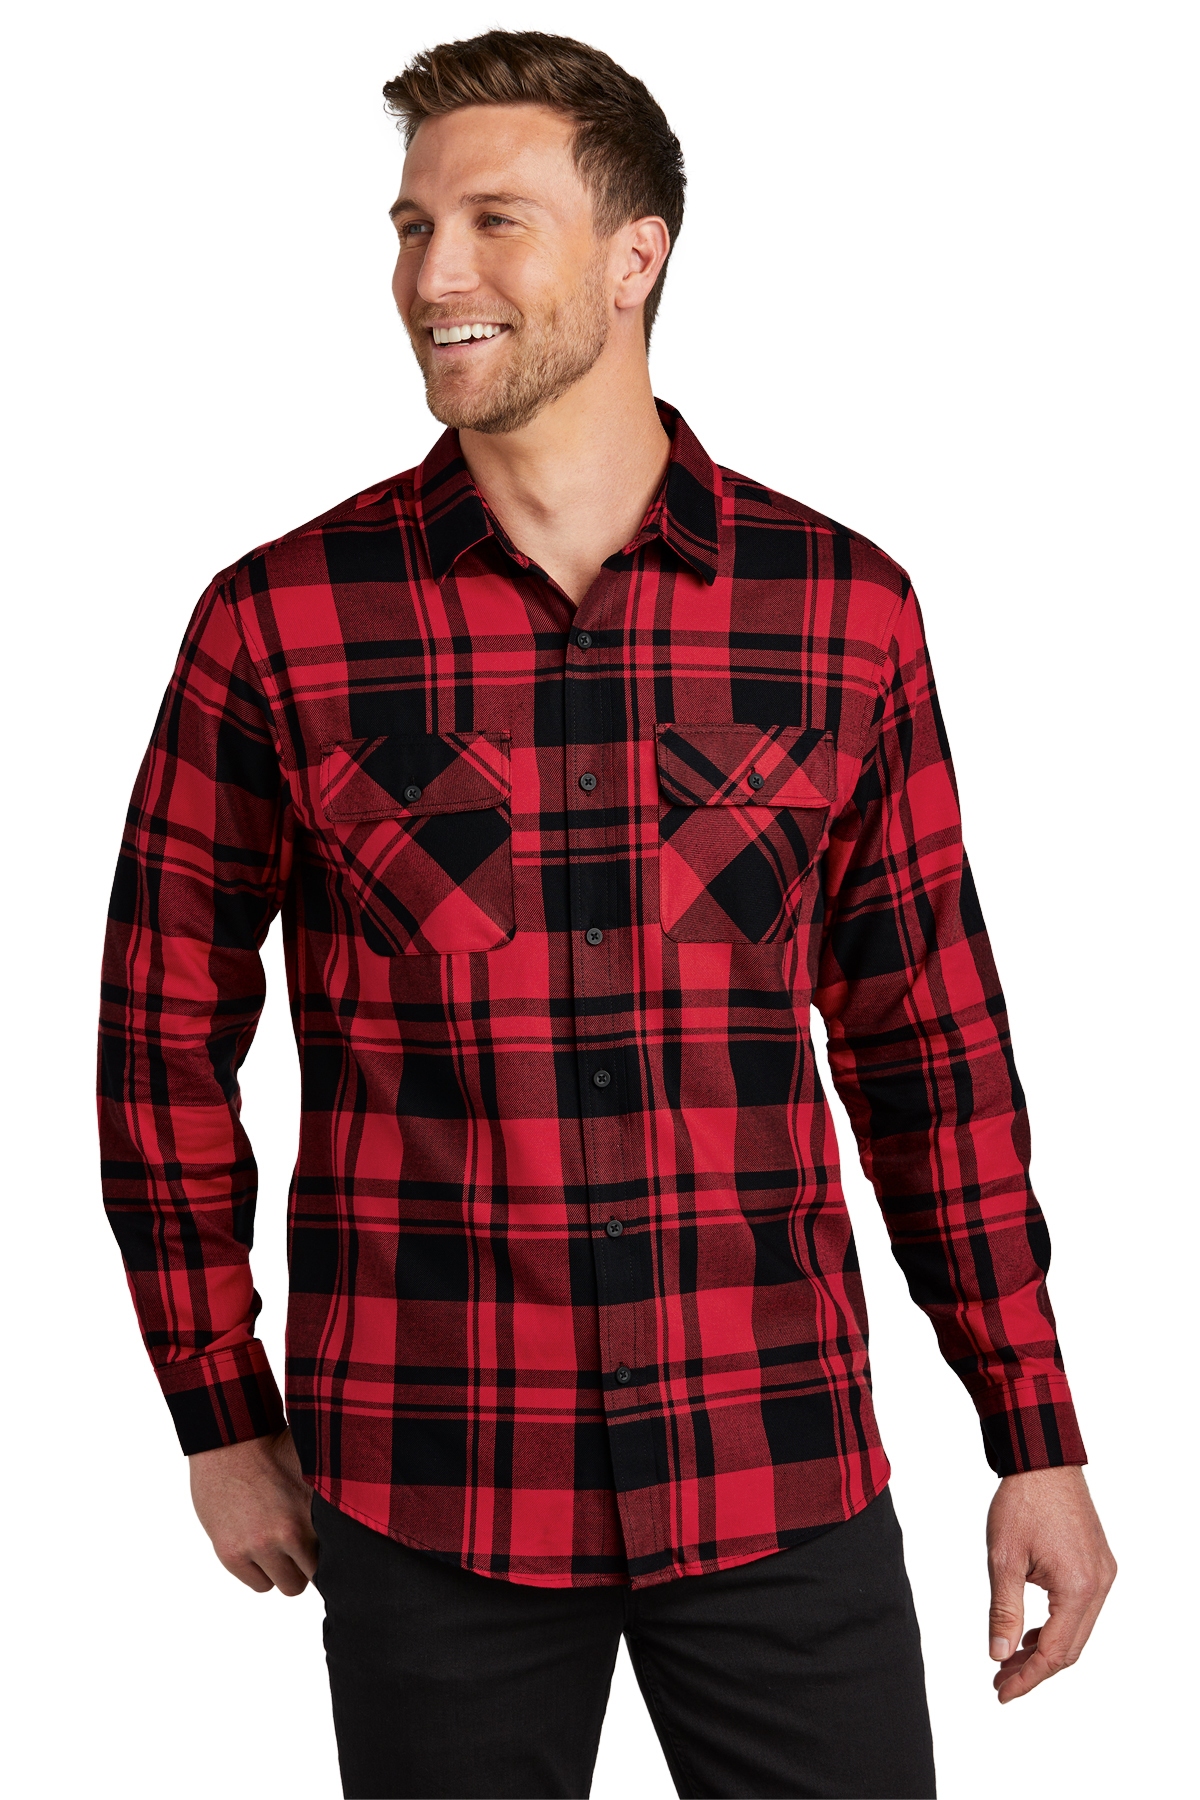 How To Style Flannels For Men  5 Flannel Outfits For Men 